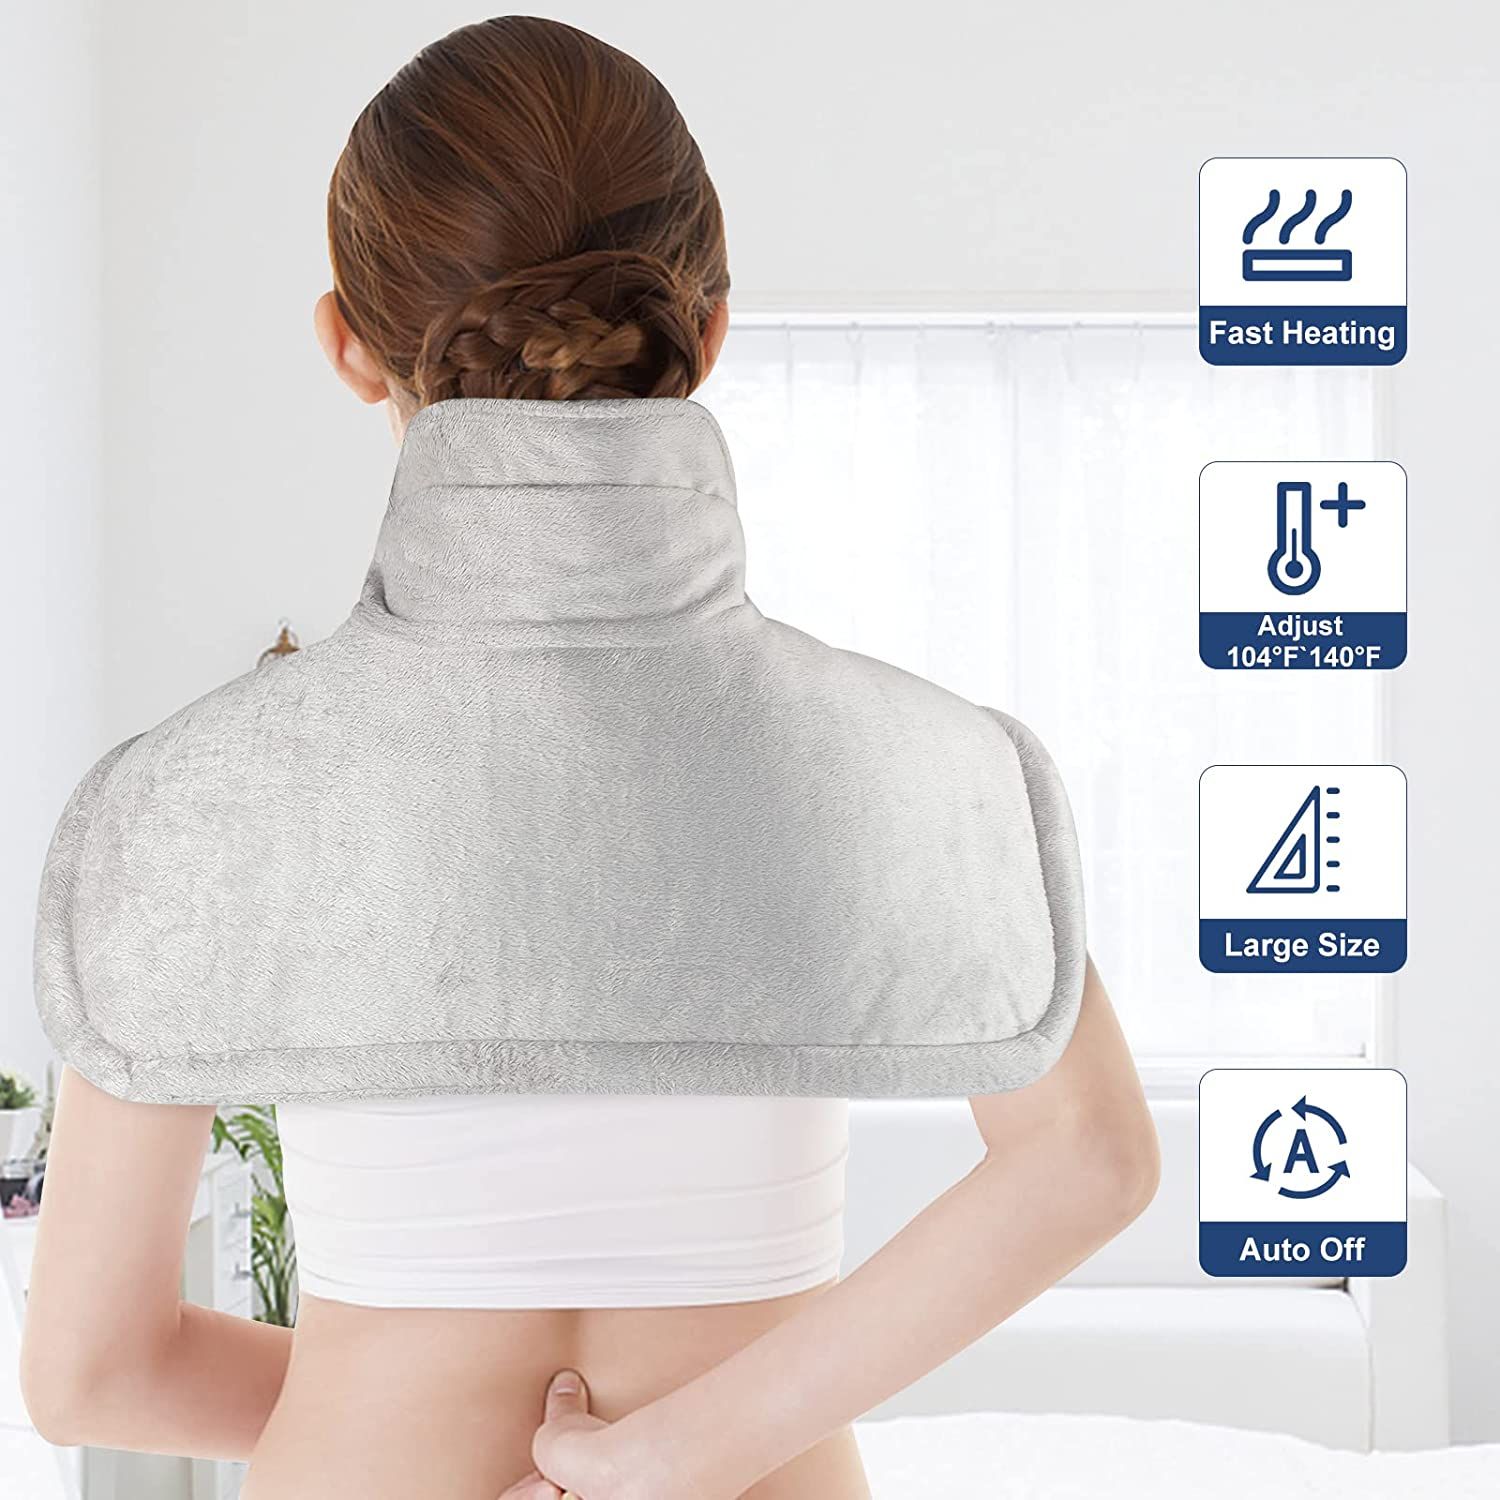 

Heating Pad for Neck and Shoulders with 6 Heat Level Settings and 4 Level Time Settings for Neck Shoulder Back Pain Relief & Gifts for Women Men Mom D